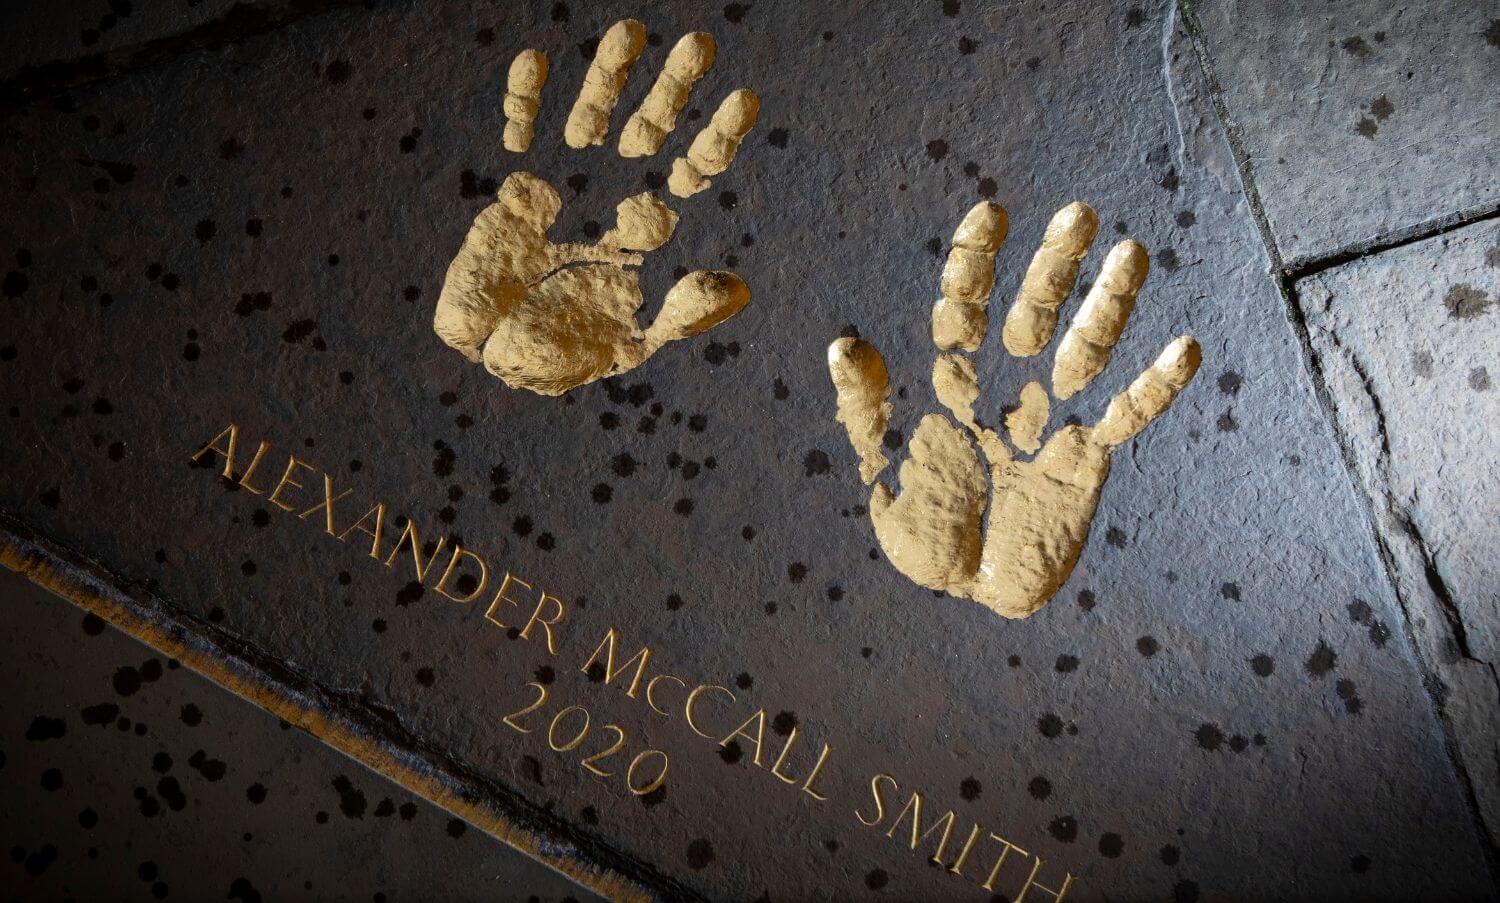 Edinburgh Award 2020 handprints engraved and gilded on a paving stone in the City Chambers Quadrangle.